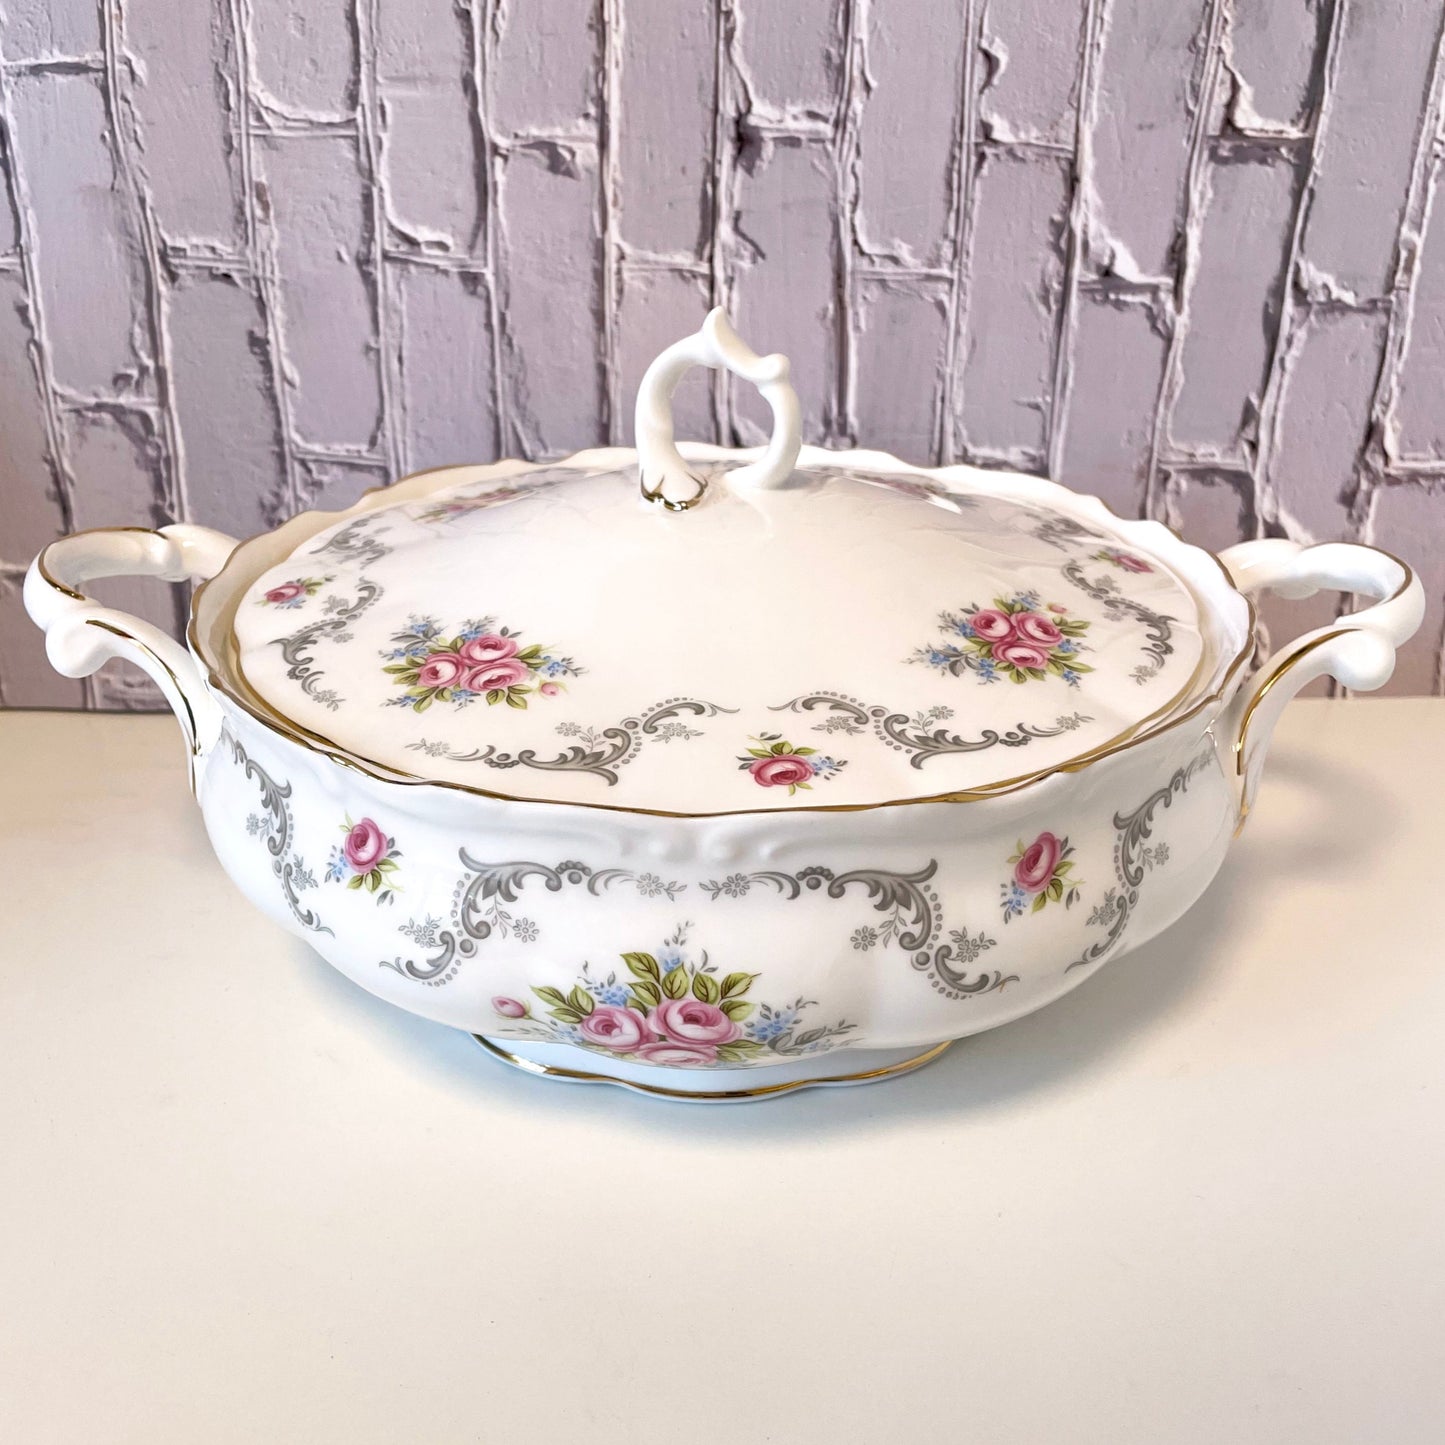 Tranquility Covered Serving Dish 10.5"